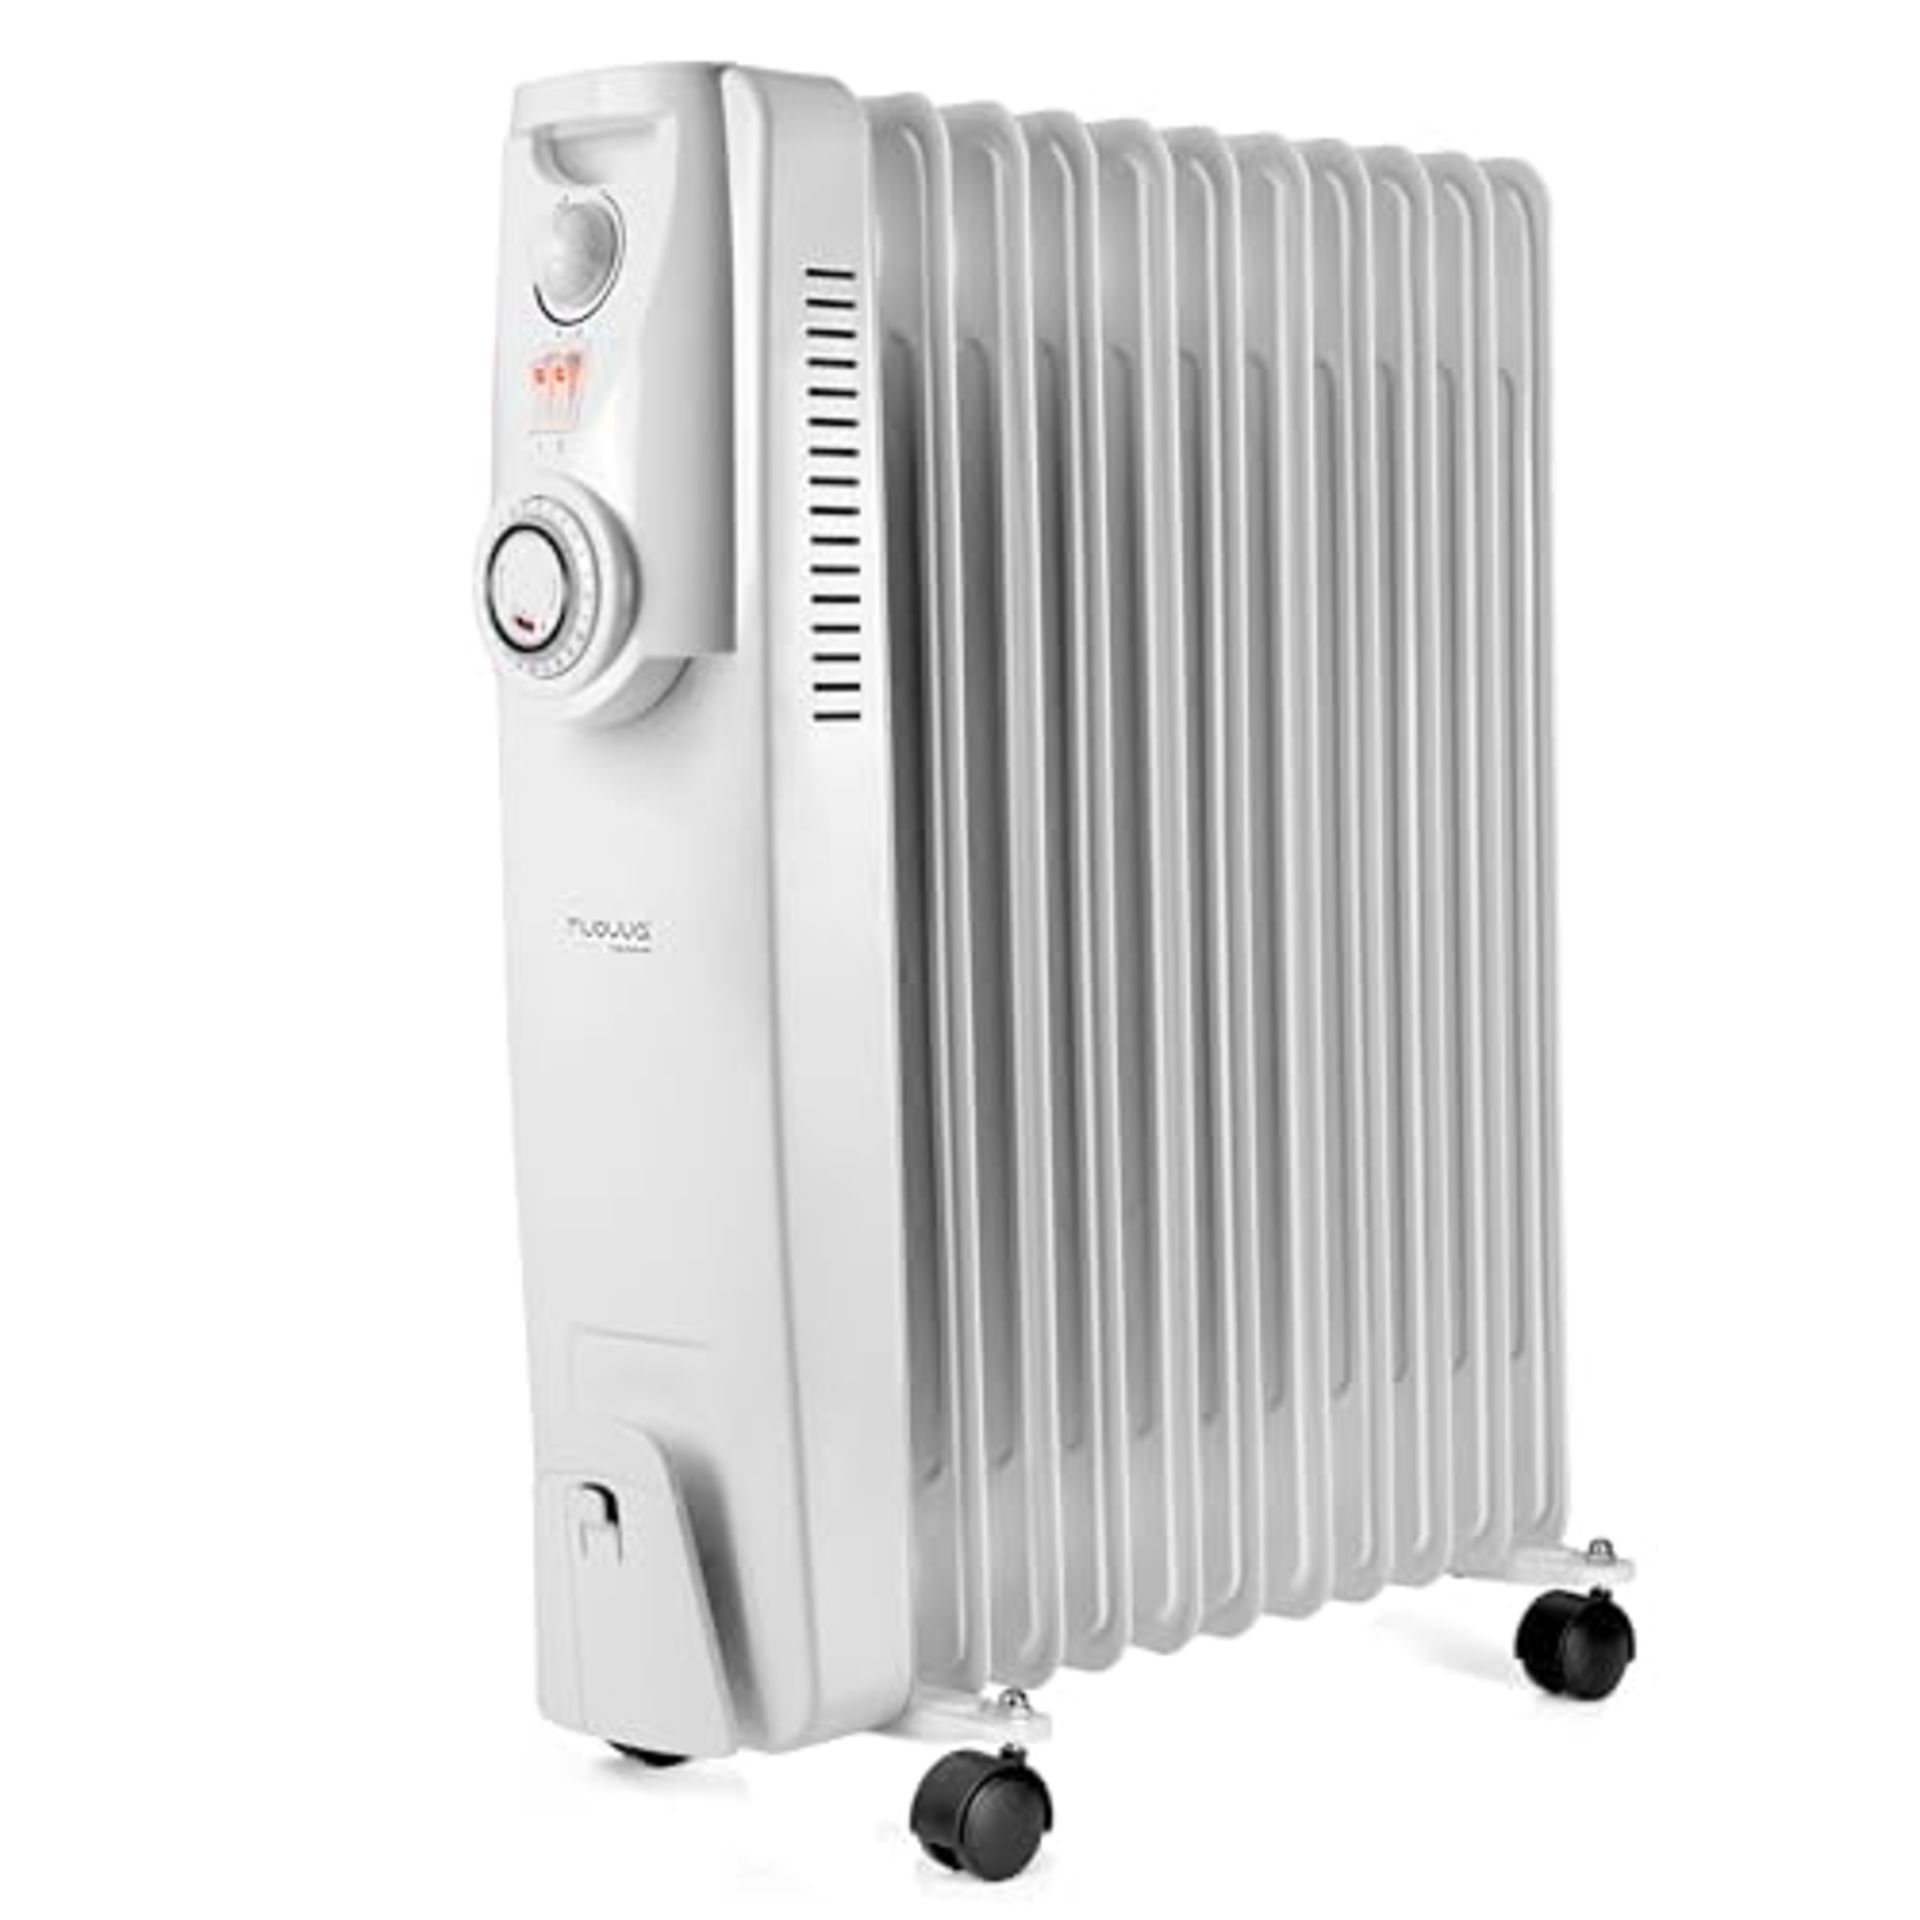 RRP £83.74 Oil Filled Radiator Free Standing Heaters for Home